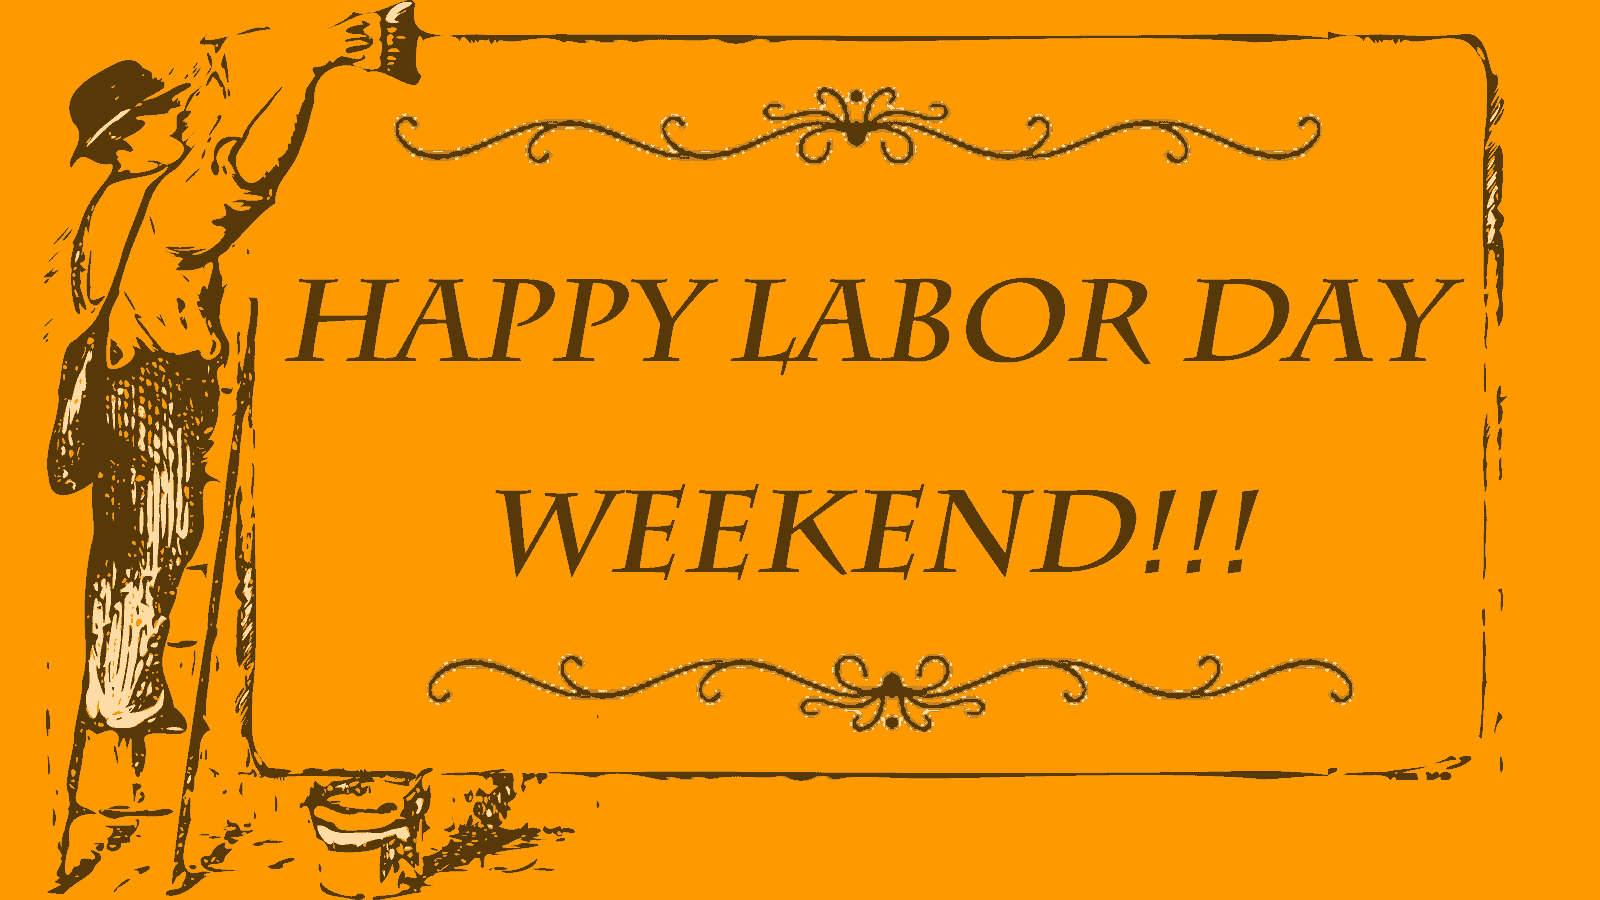 To Enlarge Vintage Retro Happy Labor Day Graphic Background Wallpaper